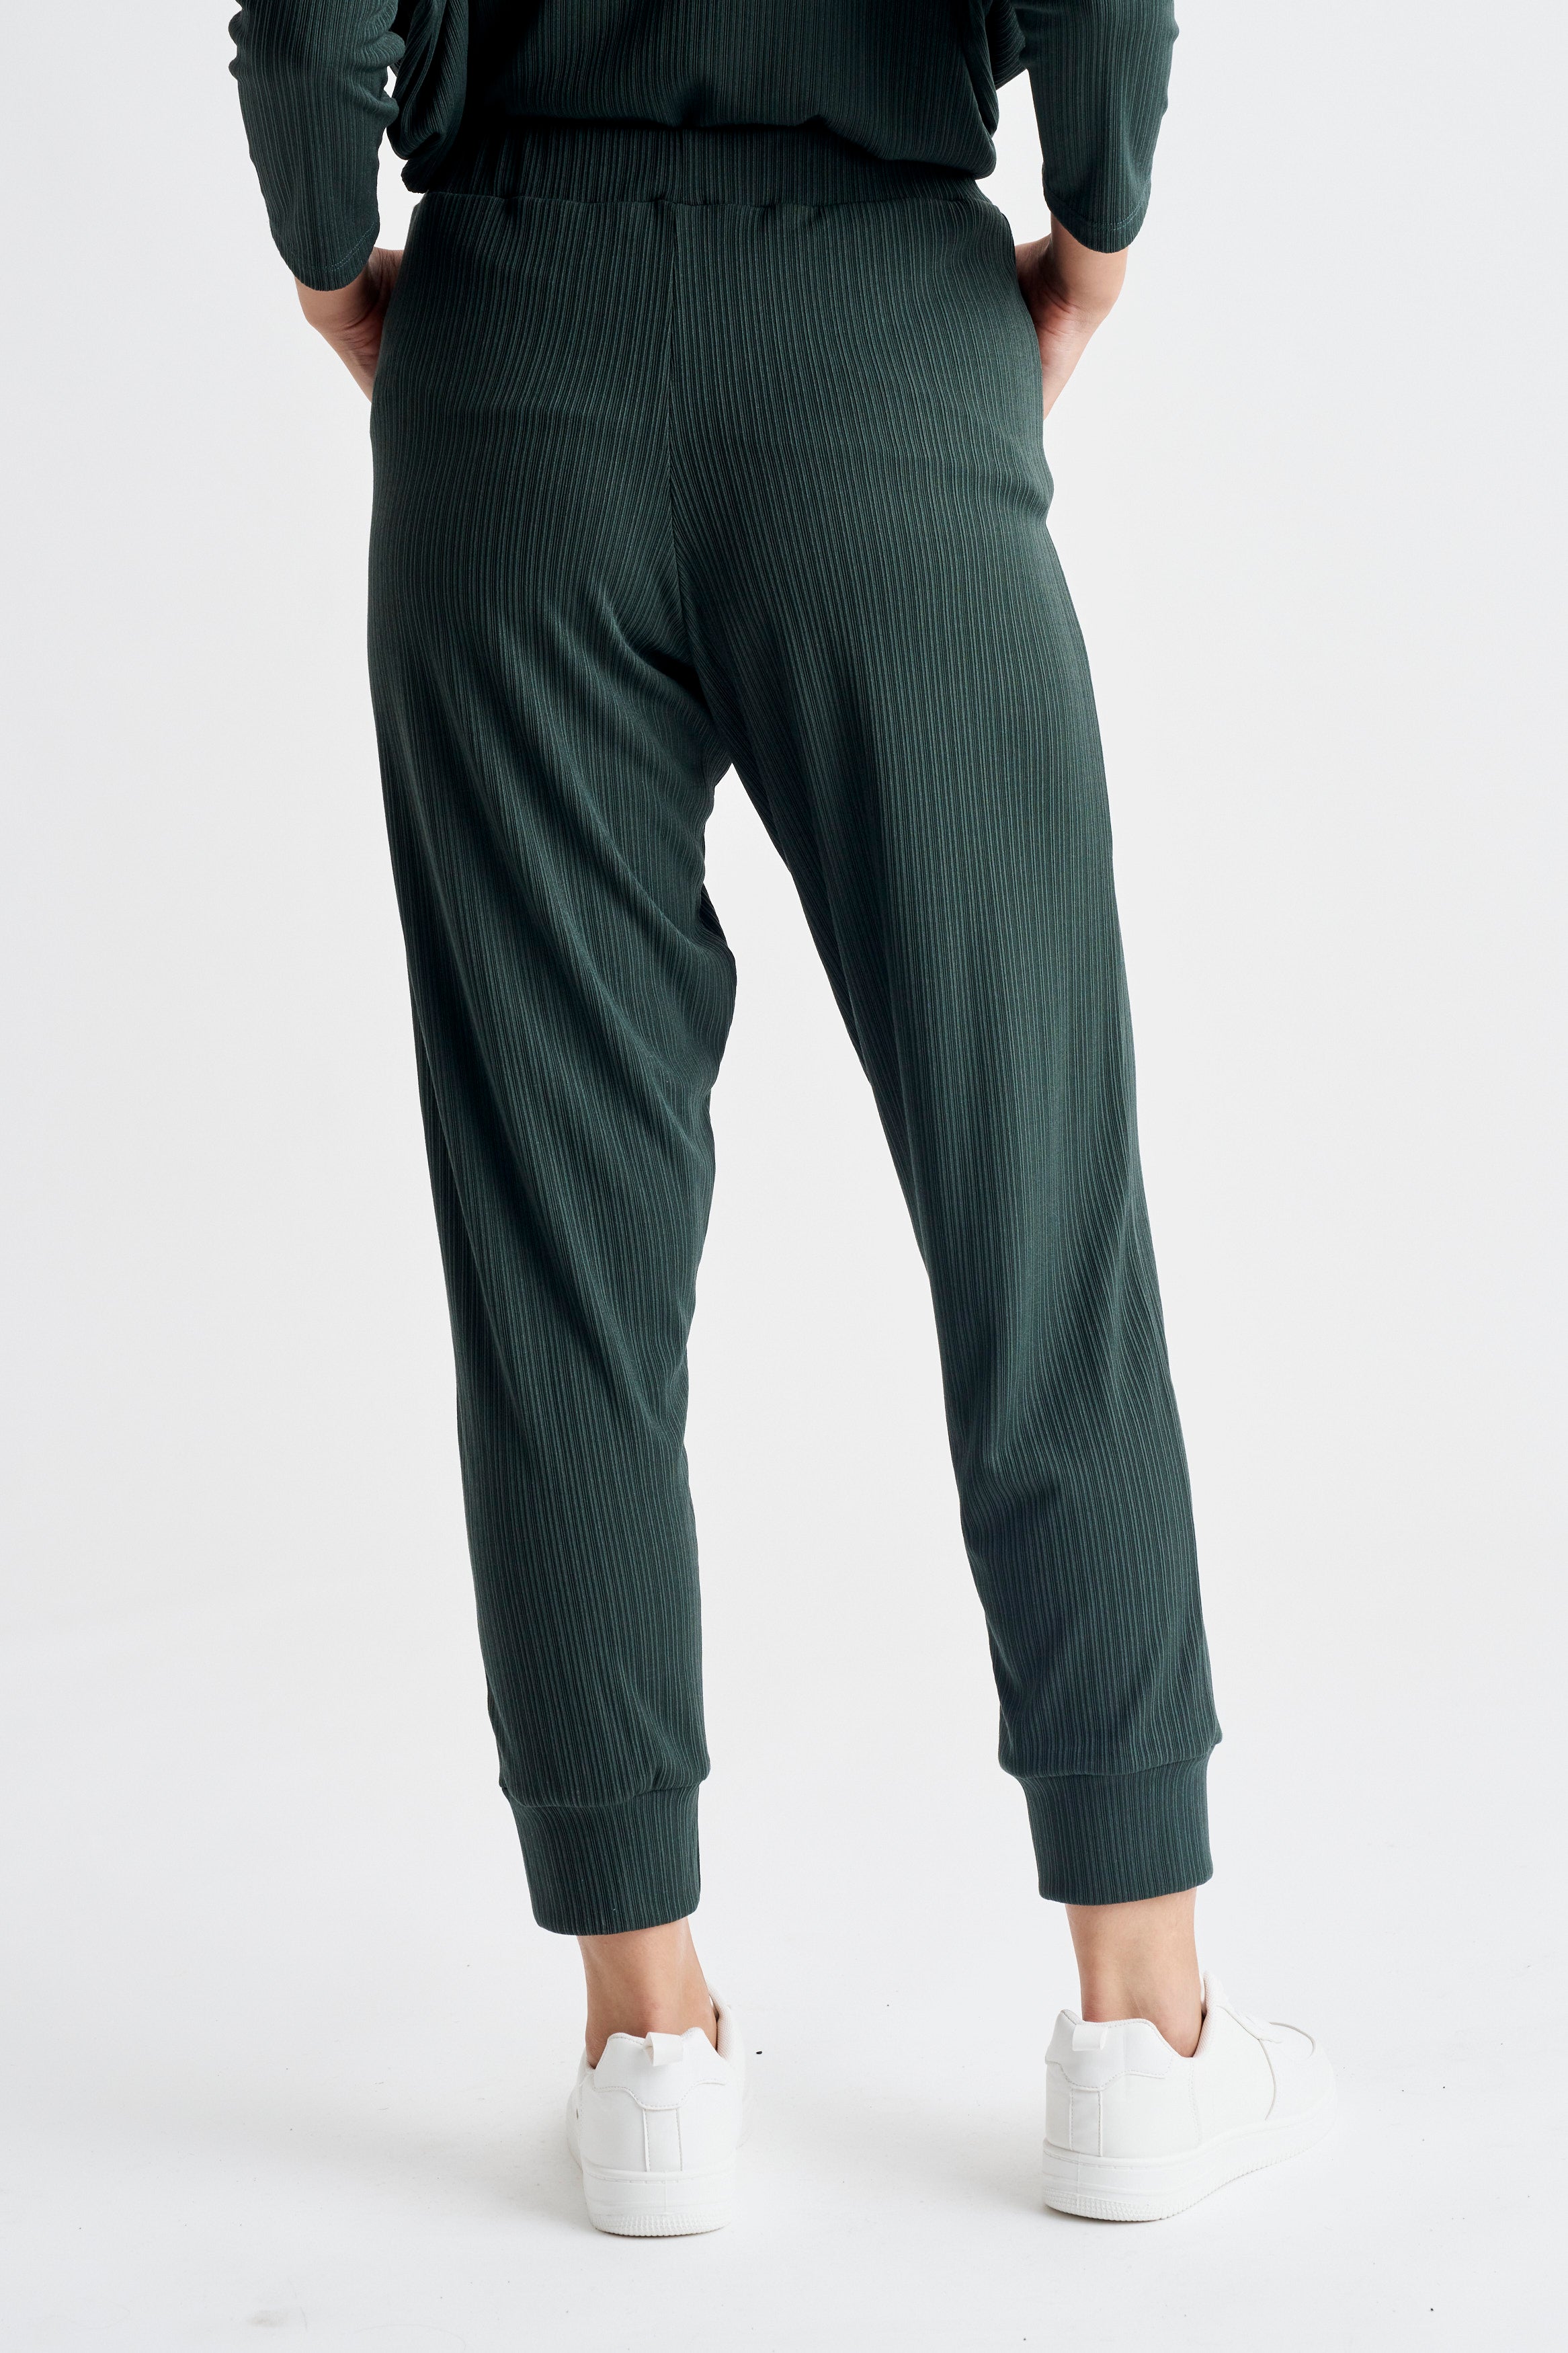 LUXE CARIBBEAN PANT